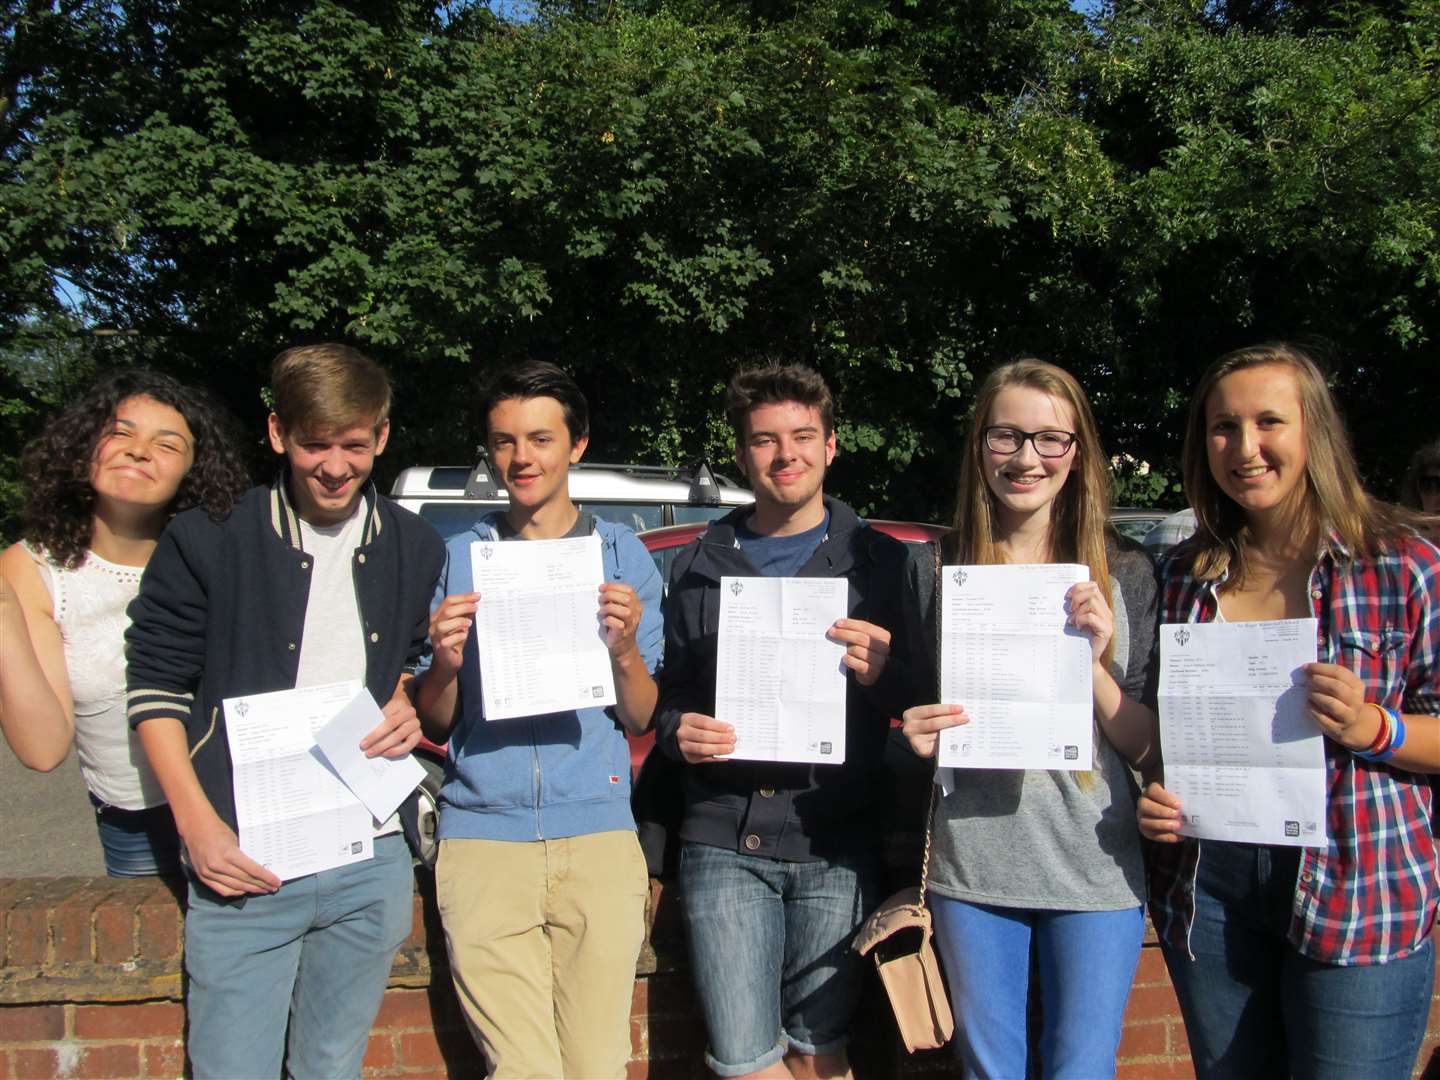 Pupils celebrating their GCSE results at Sir Roger Manwood's School